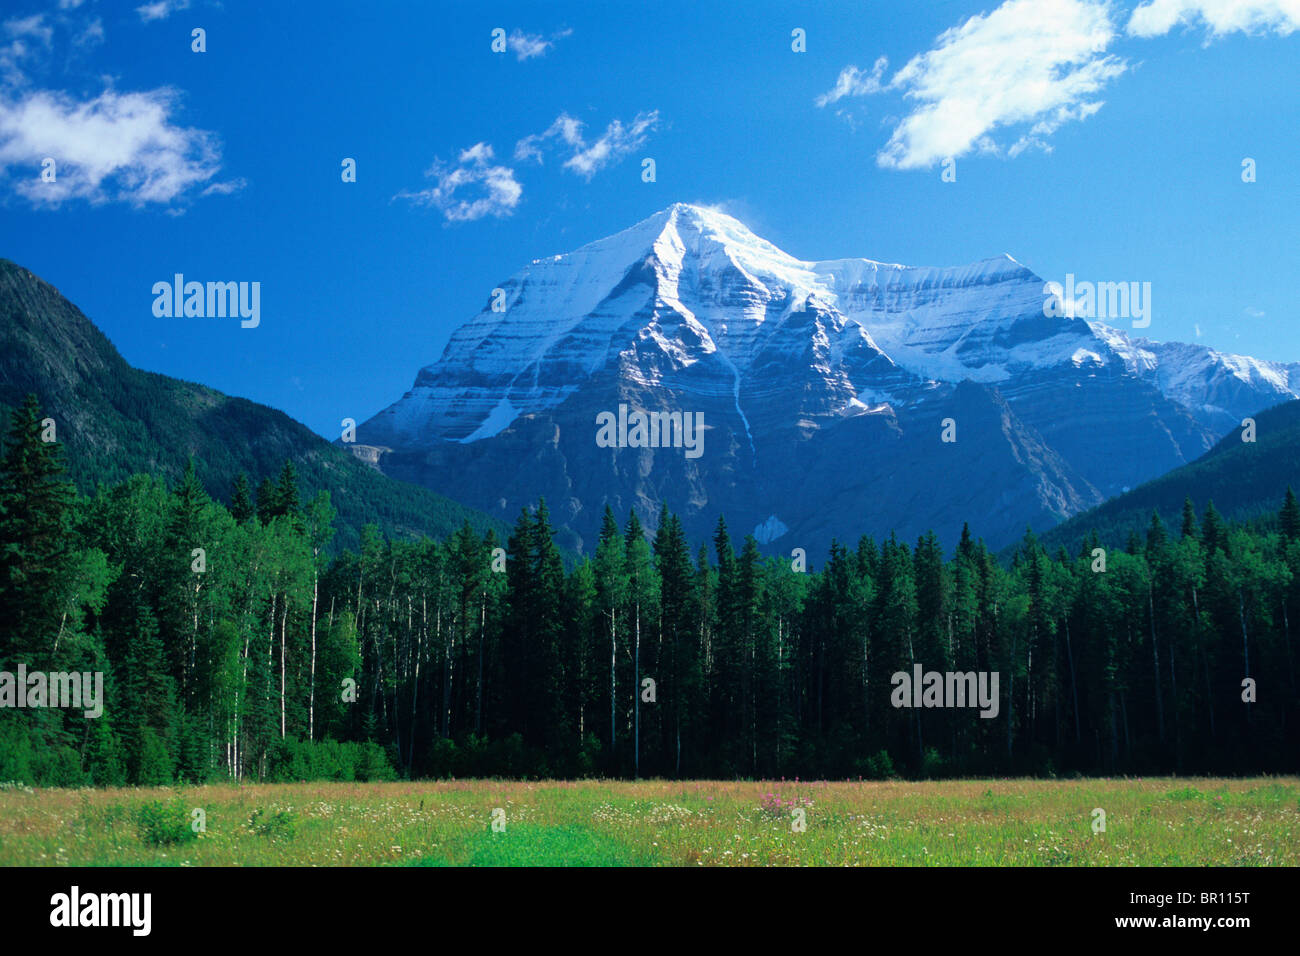 Scenic view of the Emperor Face on Mt. Robson as seen from the Stewart-Cassiar Highway in British Columbia, Canada. Stock Photo